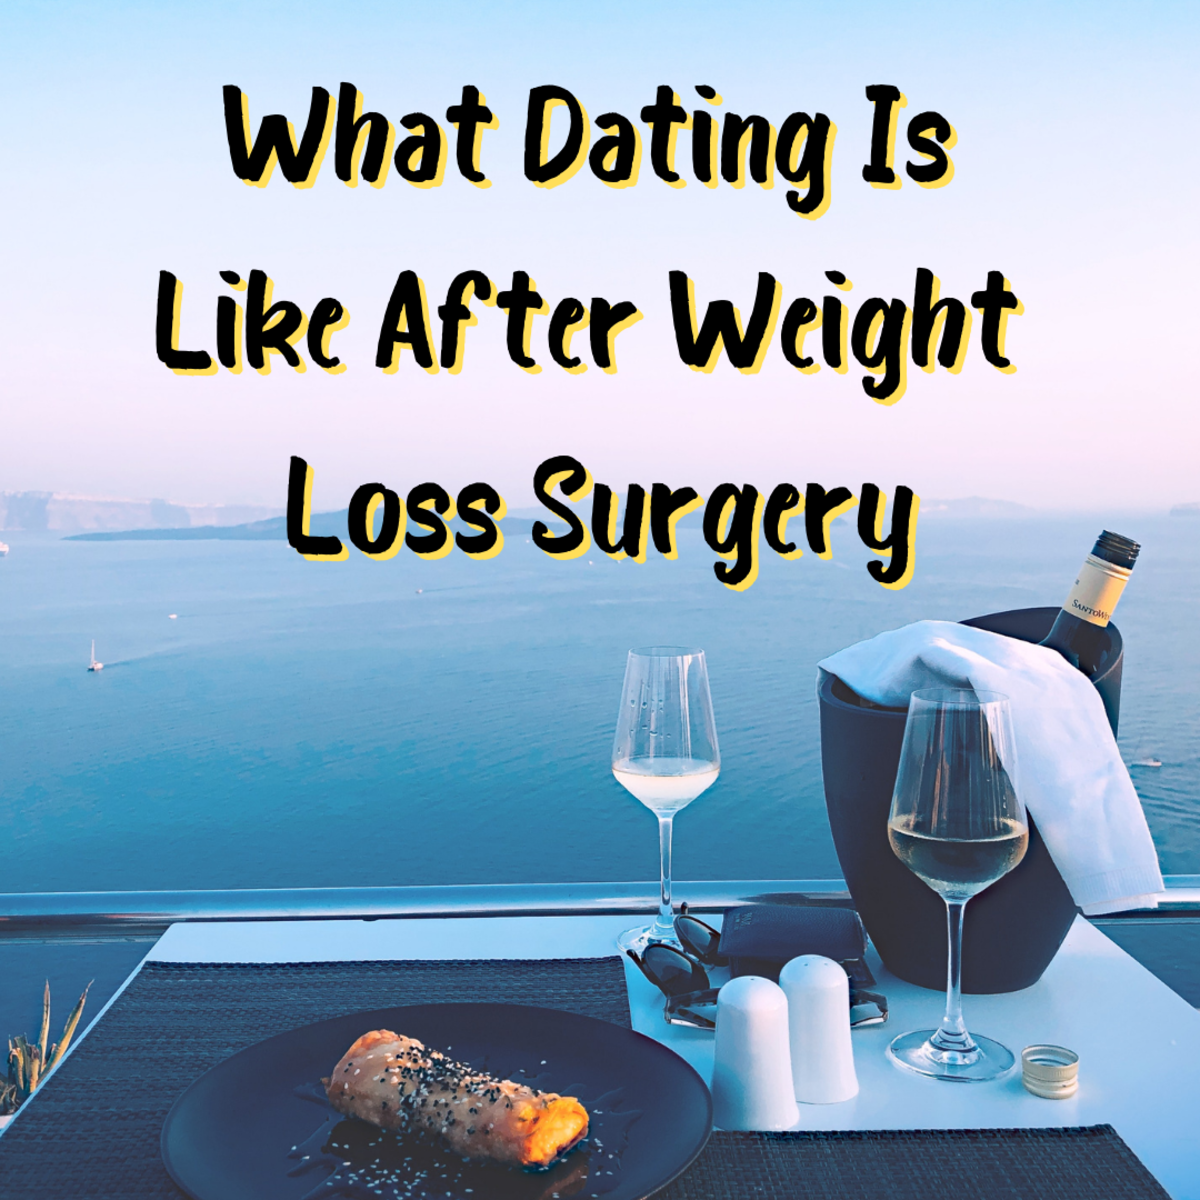 You might be surprised by how much your dating world will change after bariatric surgery. Read on to learn about my 6 major discoveries.